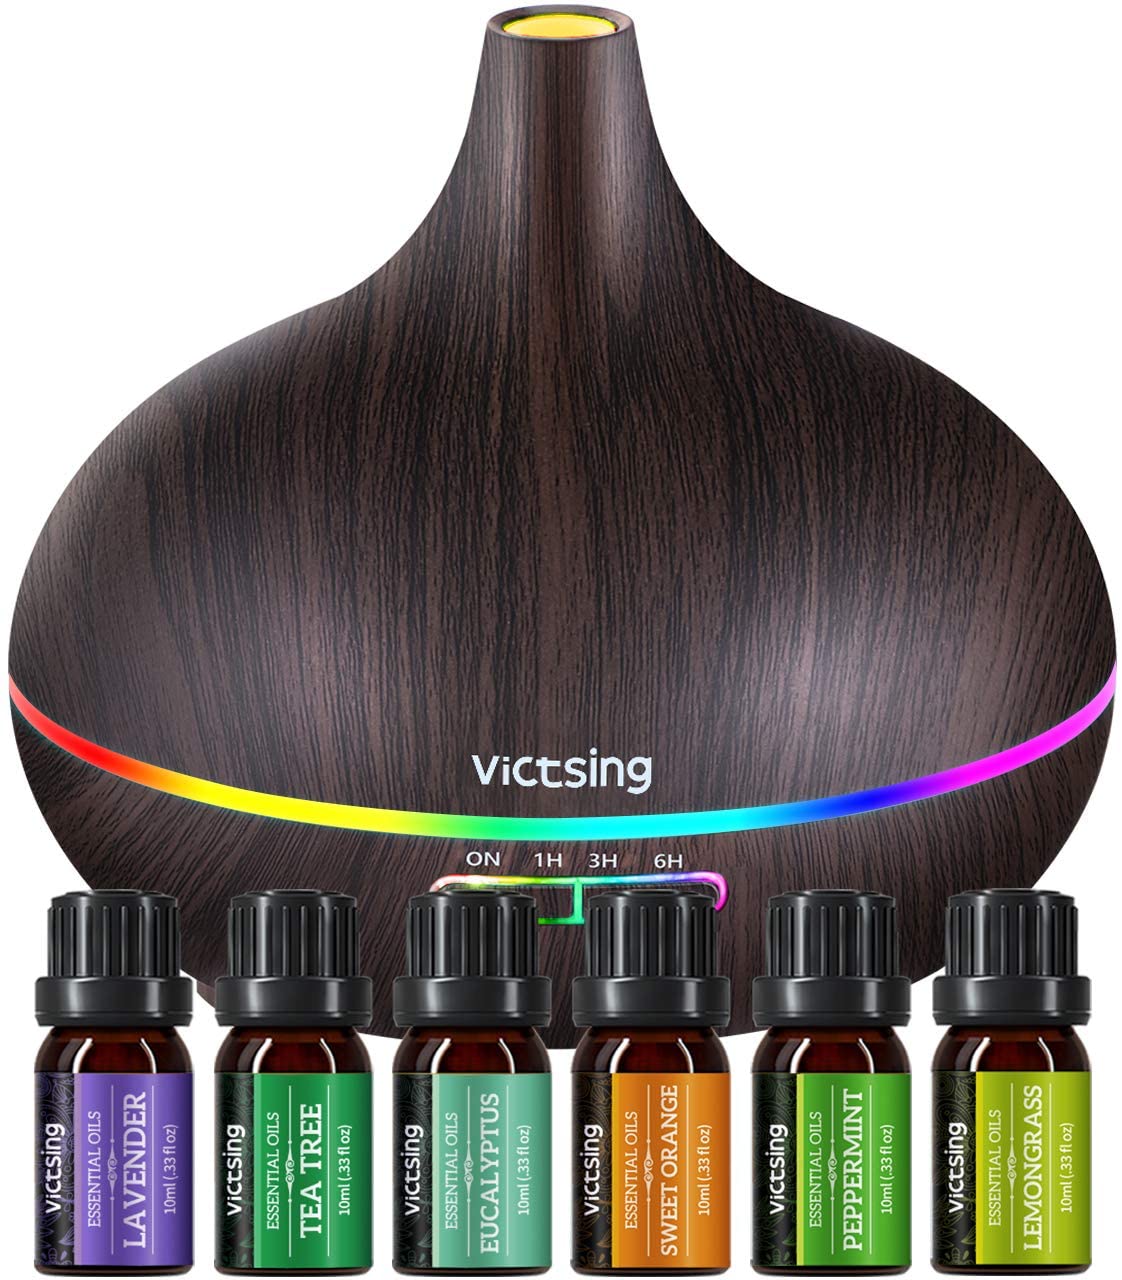 Best for Small Rooms VicTsing 500ml Essential Oil Diffuser with Oil Set